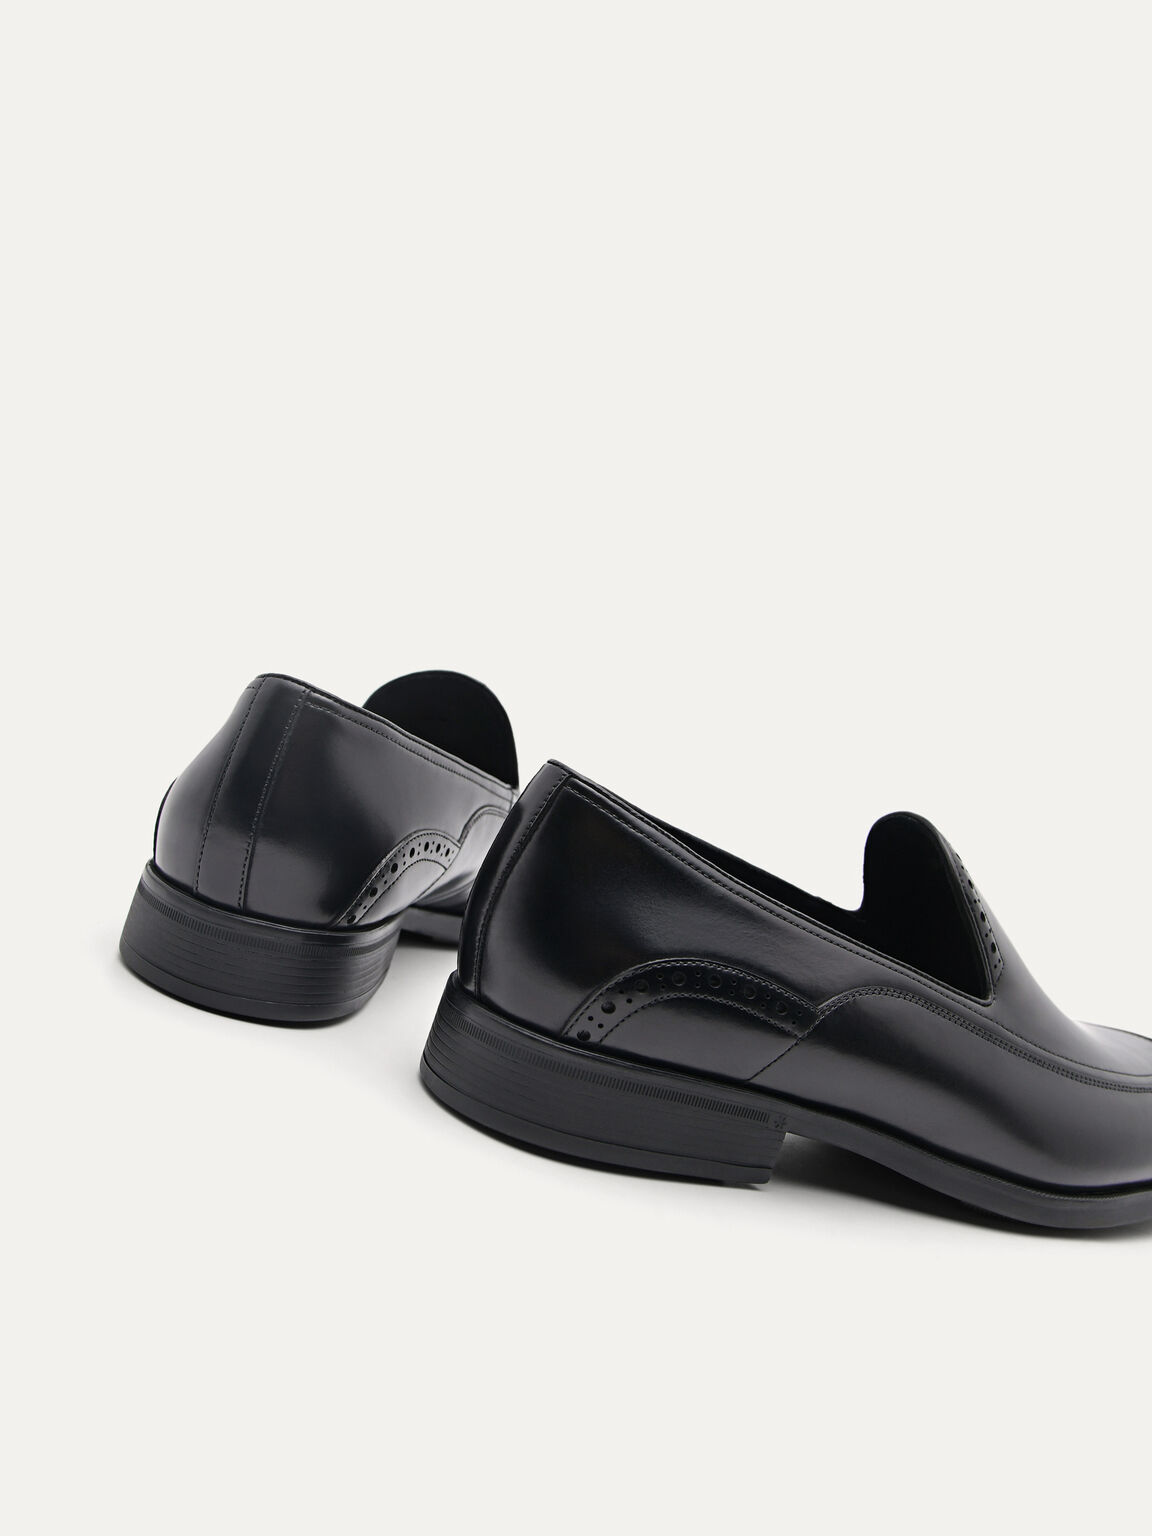 Altitude Leather Loafers, Black